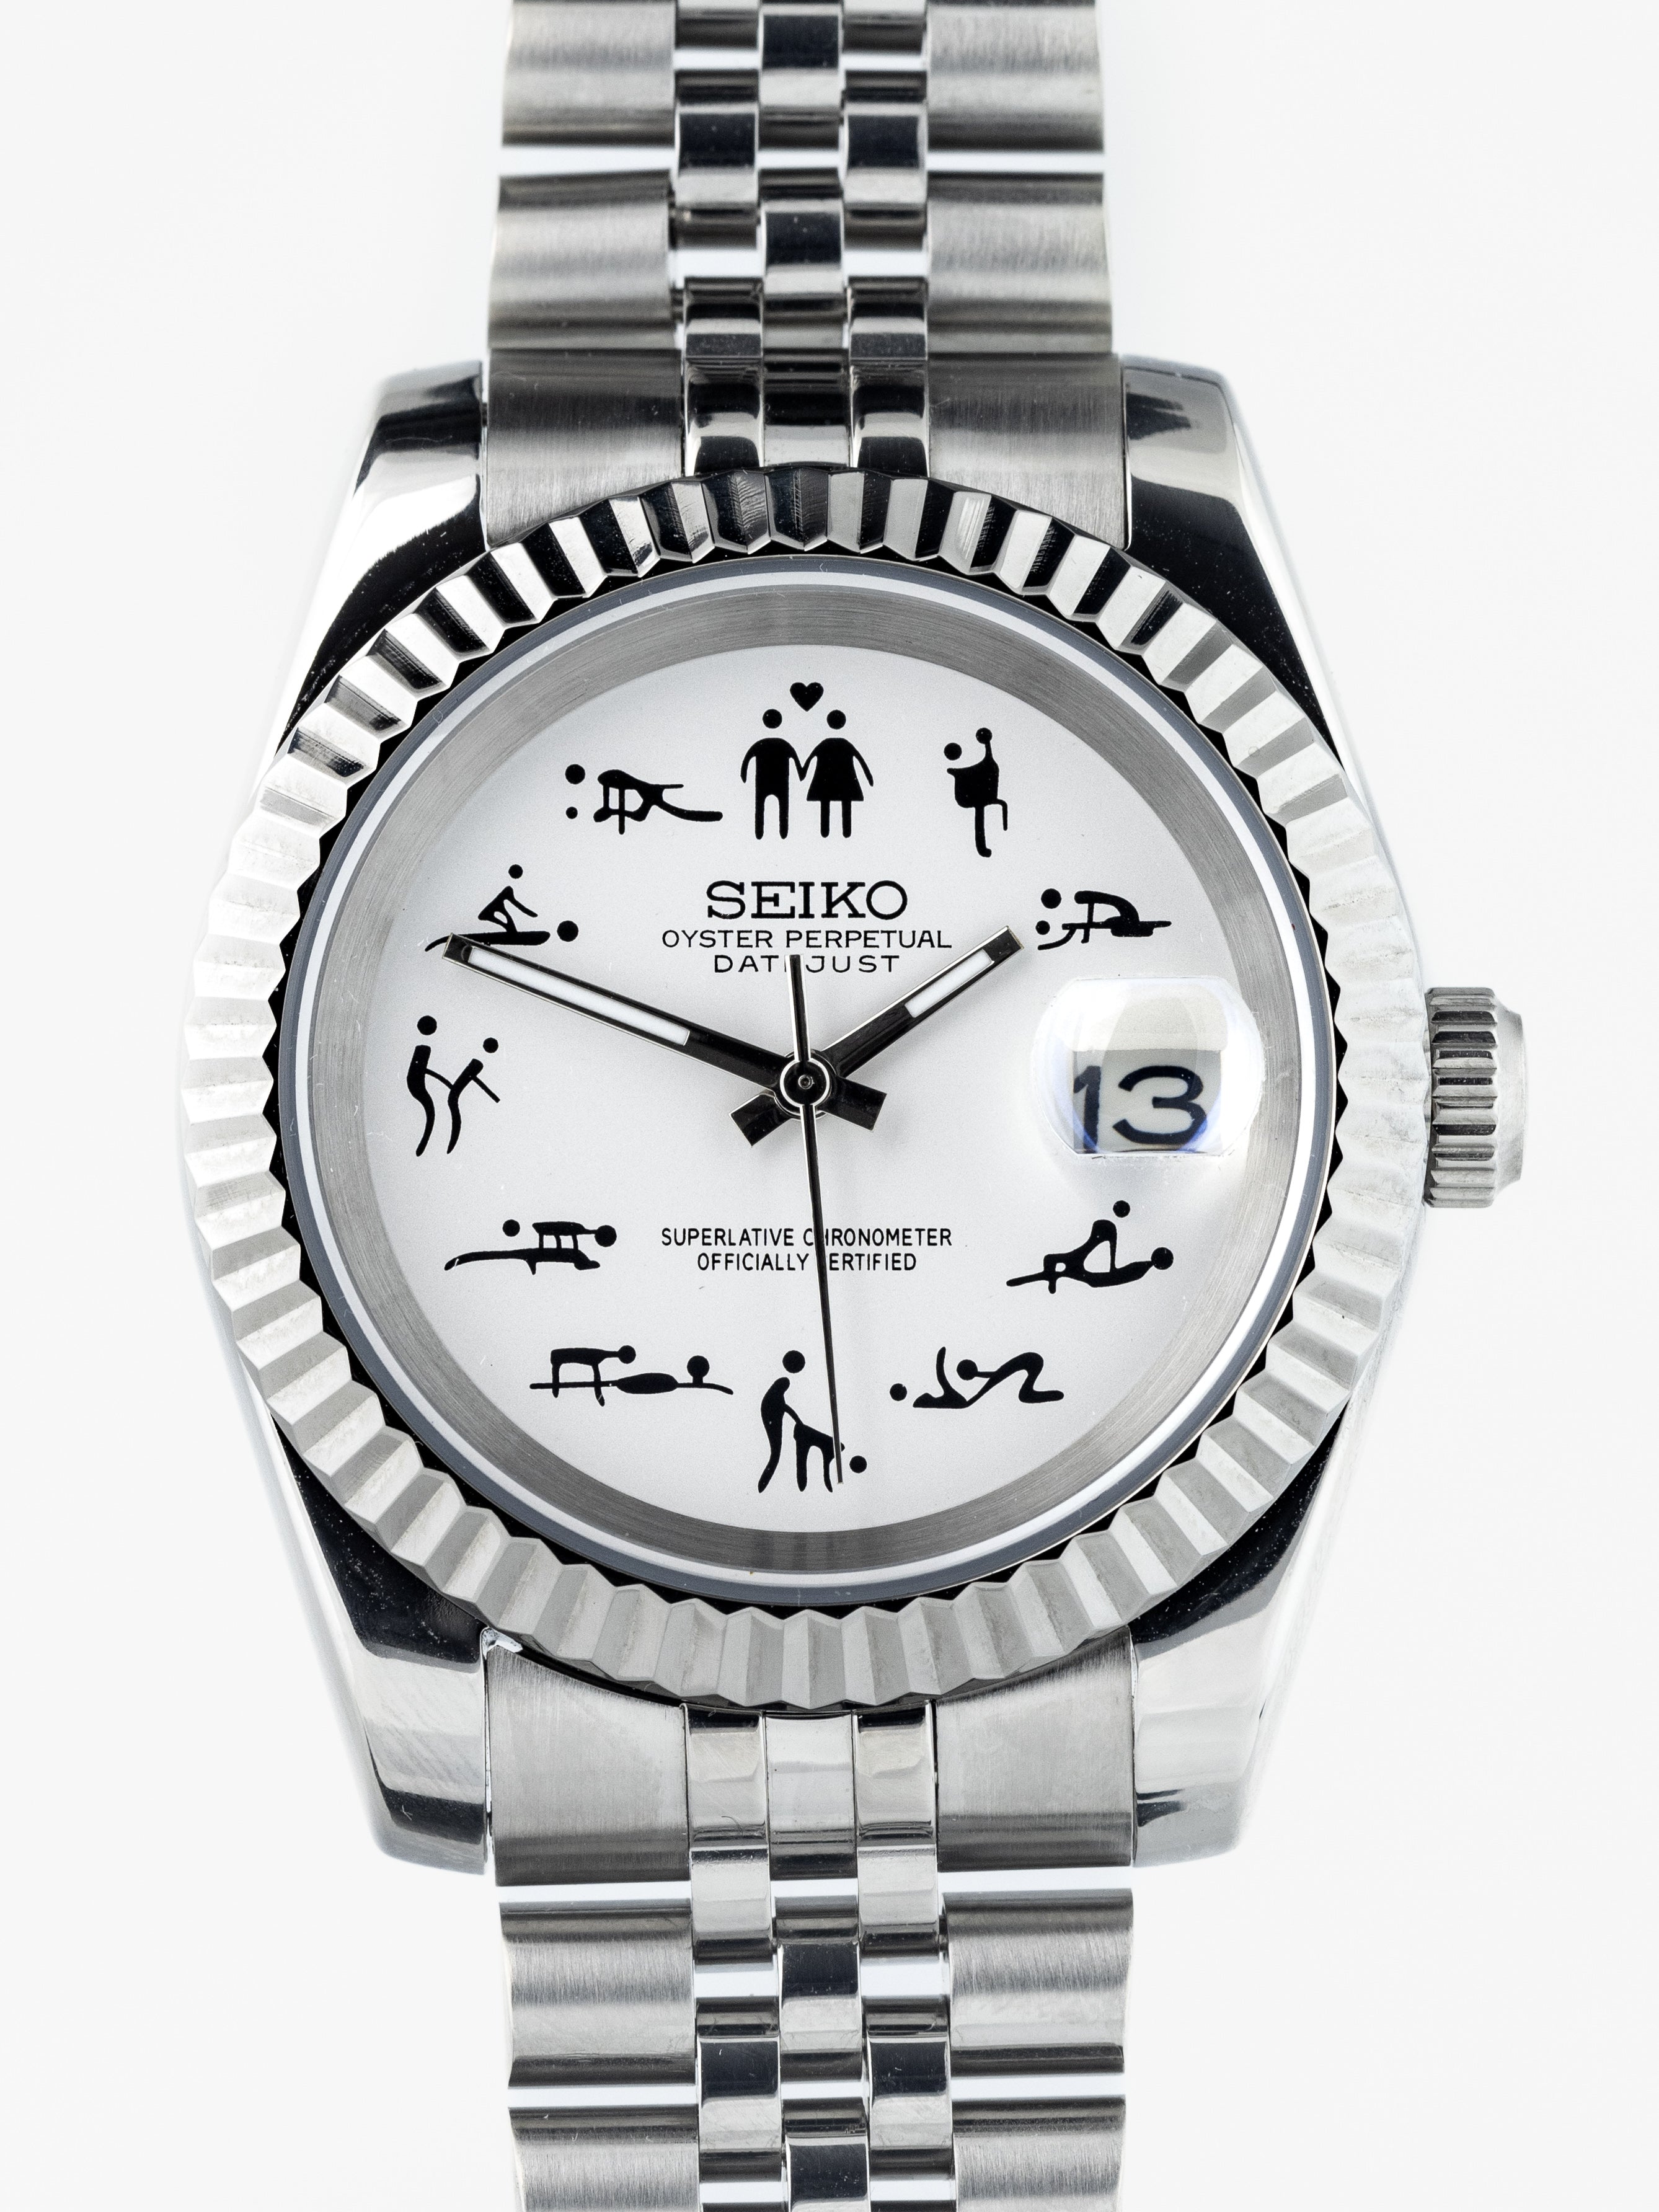 Seiko Datejust Love Poses Mod Watch with Skeleton Back